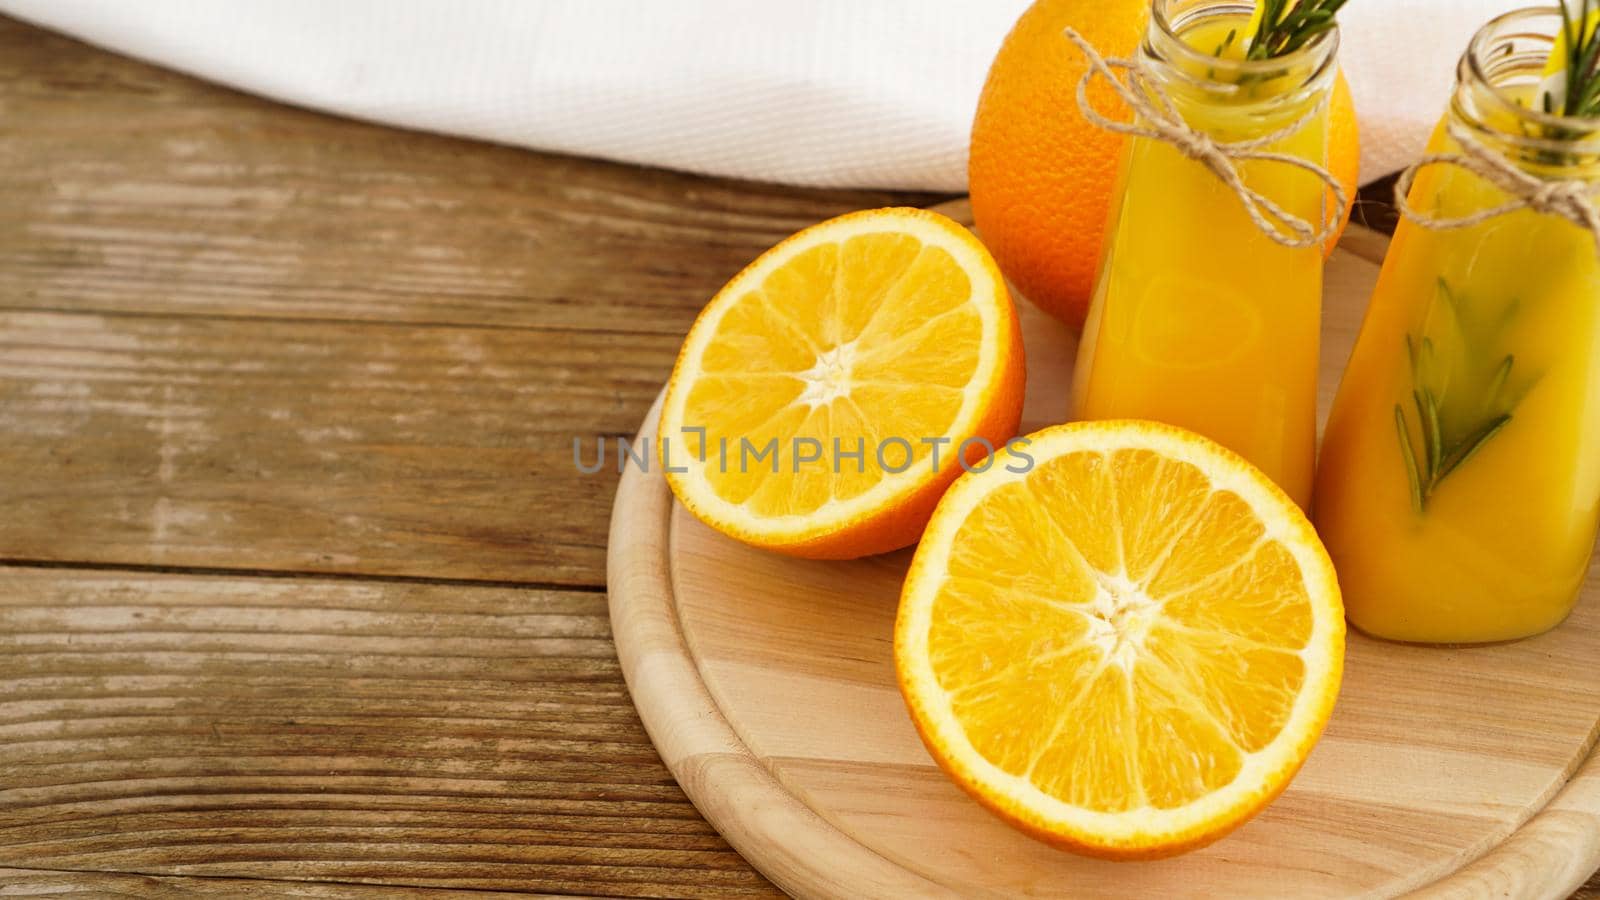 Orange juice in glass bottles. The juice is decorated with a sprig of rosemary. Juice on wooden background with white towel